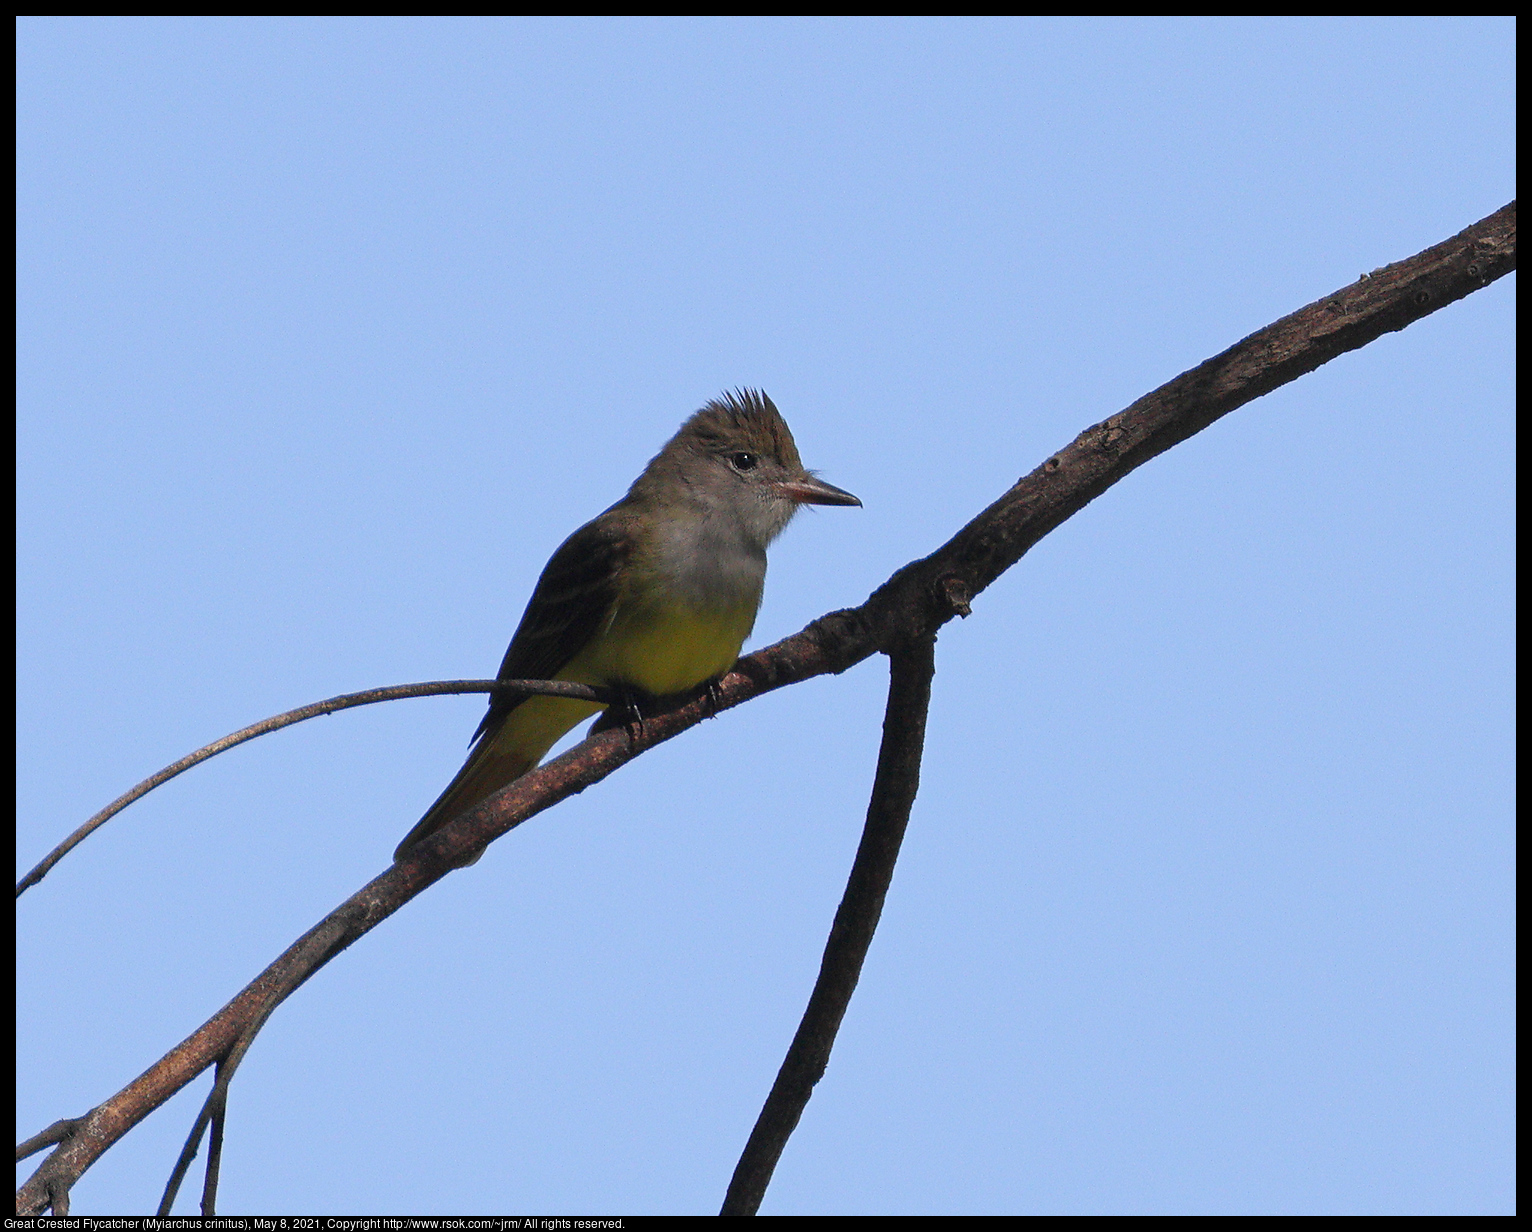 Great Crested Flycatcher (Myiarchus crinitus), May 8, 2021